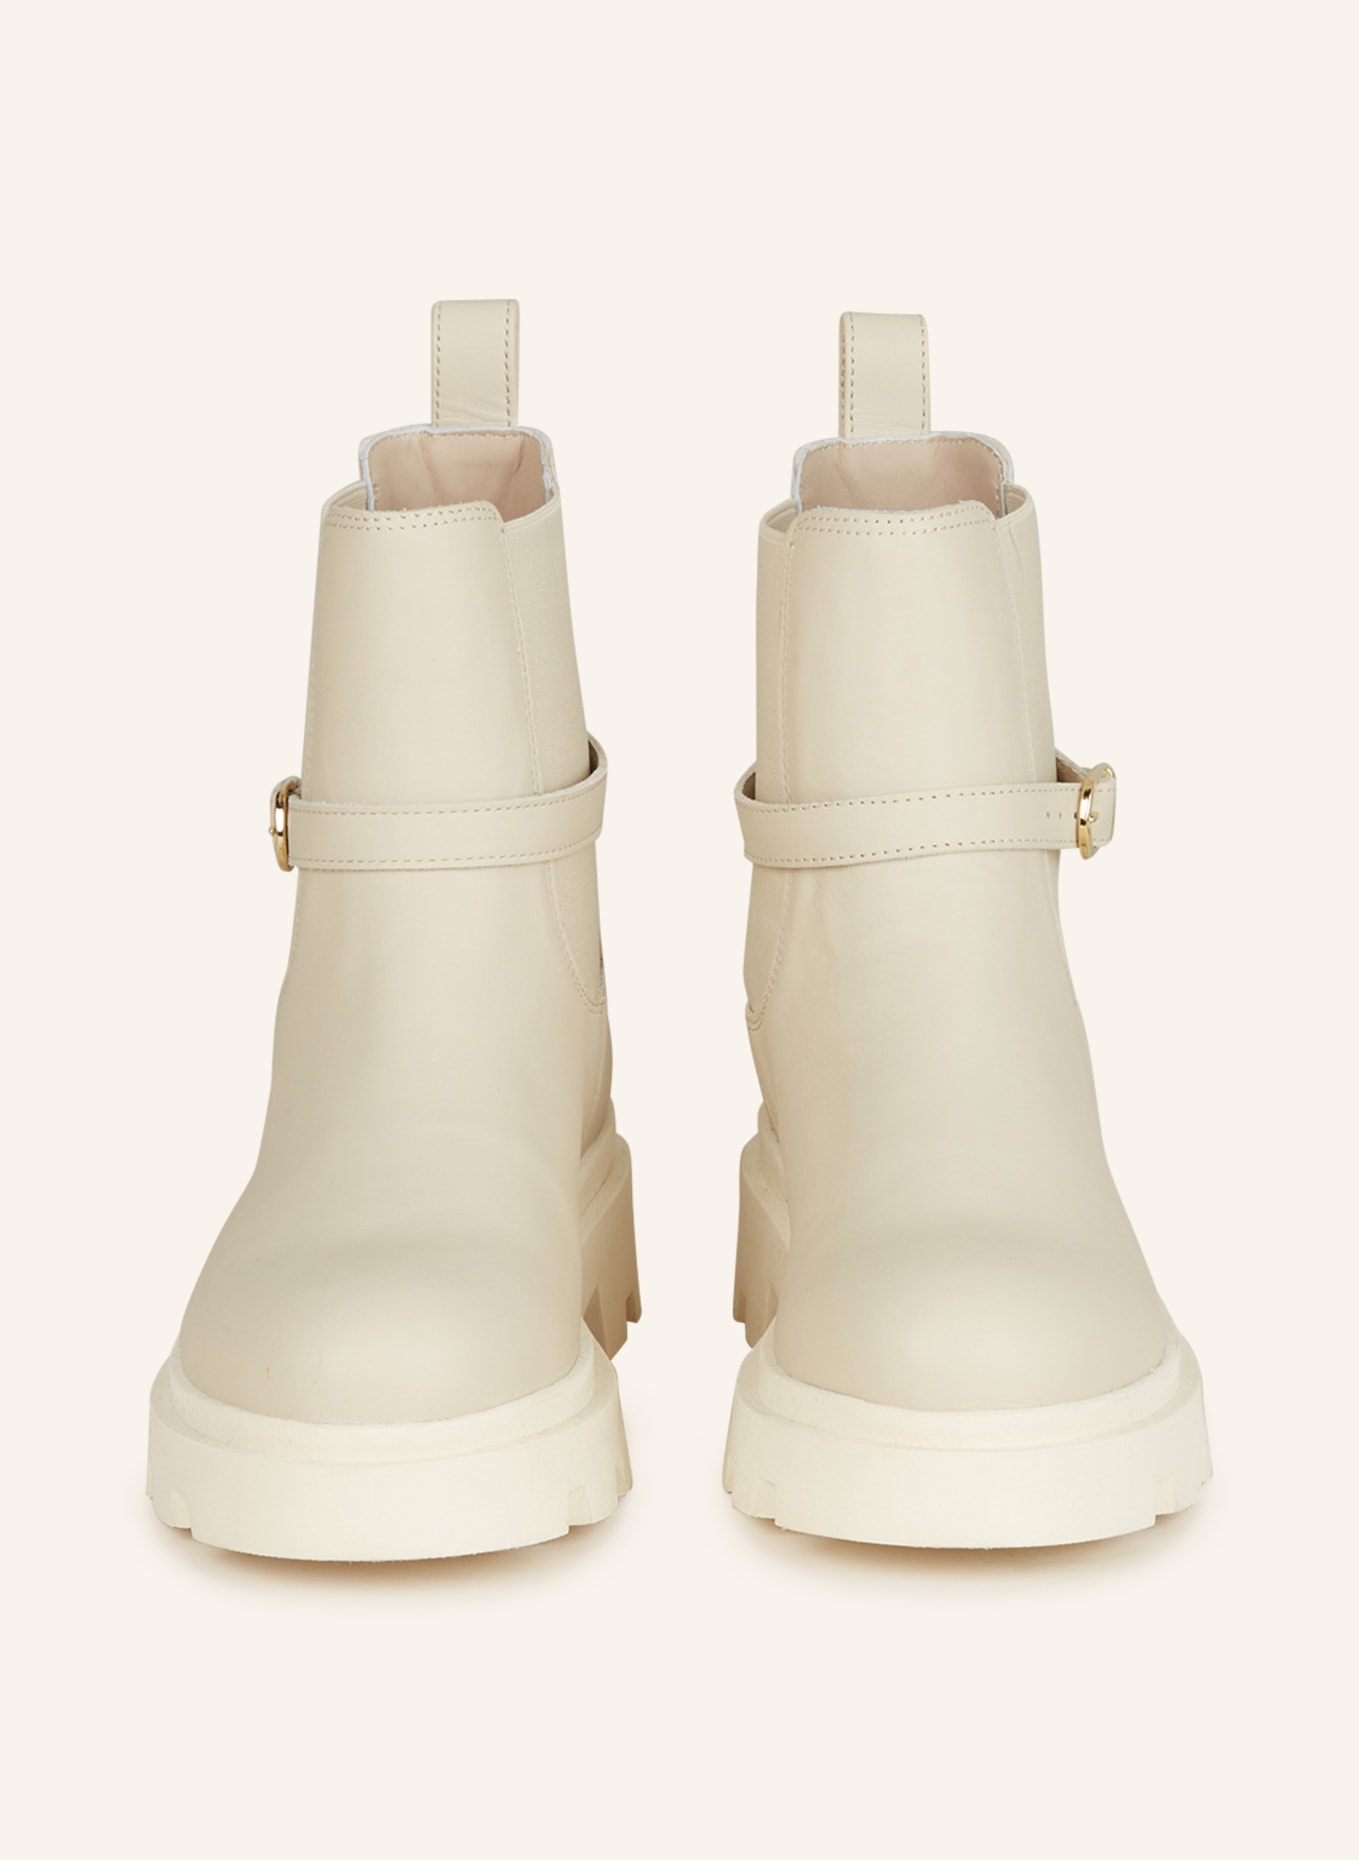 HEY MARLY Chelsea-Boots CLASSY AESTHETIC, Farbe: CREME (Bild 3)